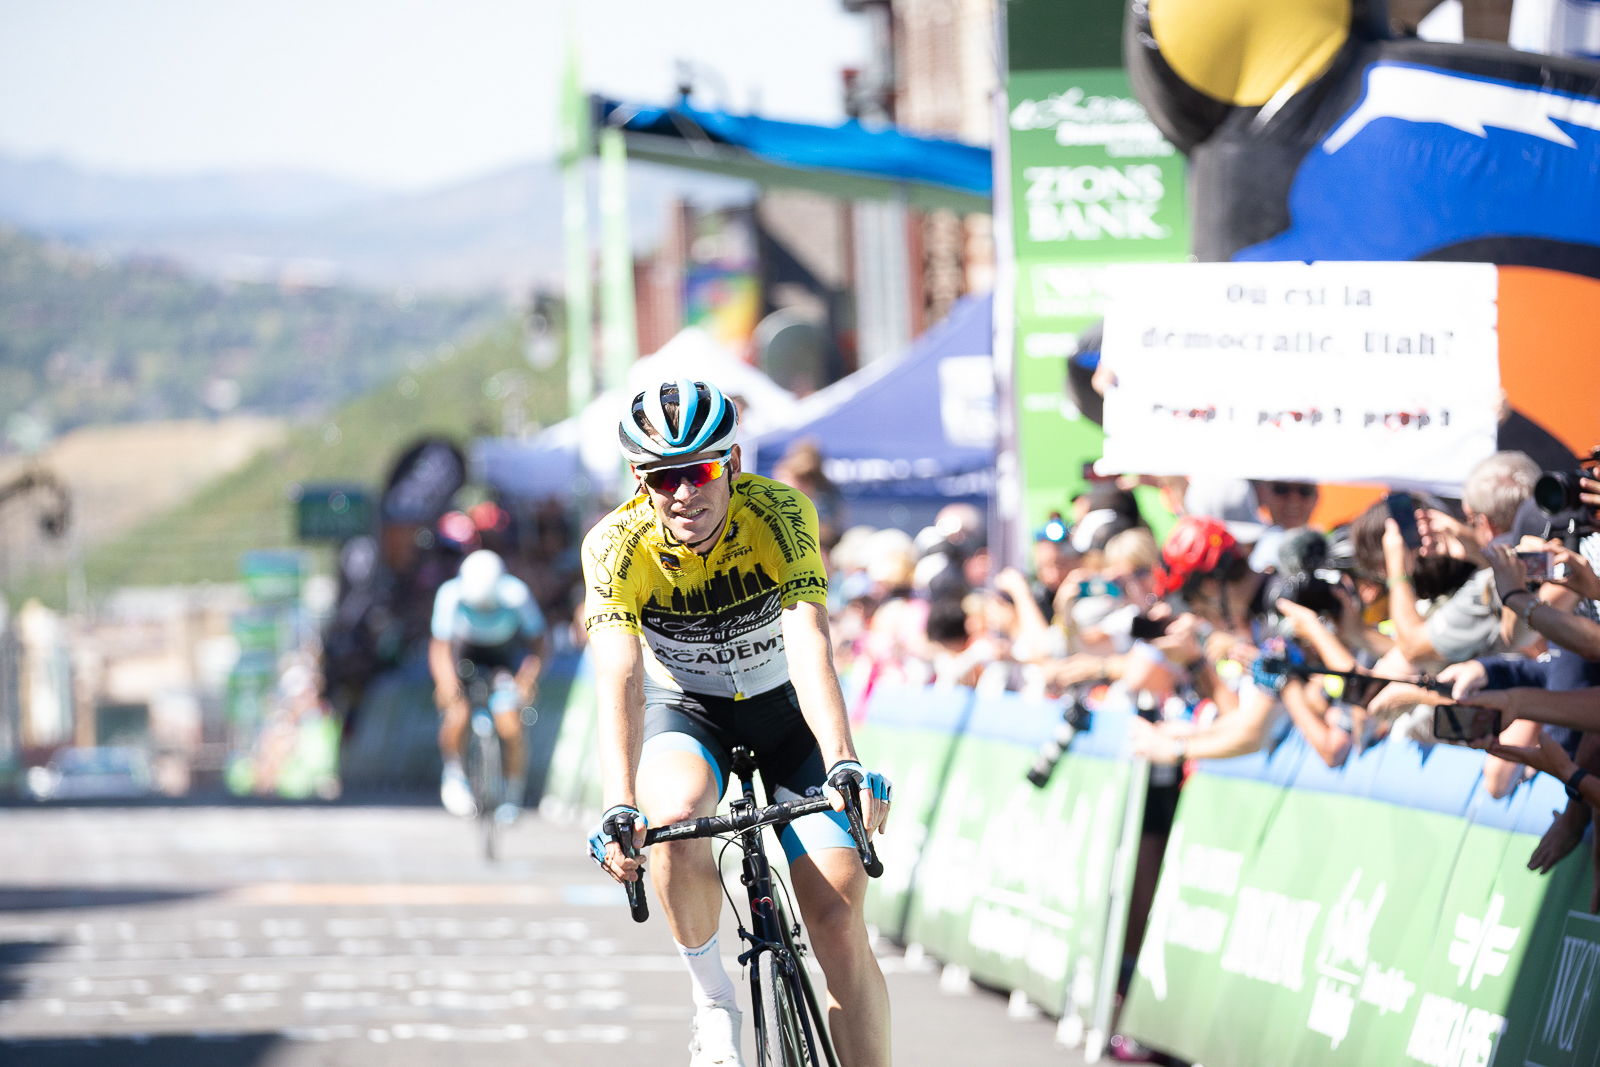 Ben Hermans (Israel Cycling Academy) finishes 4th and secures his GC win at the 2019 Tour of Utah.